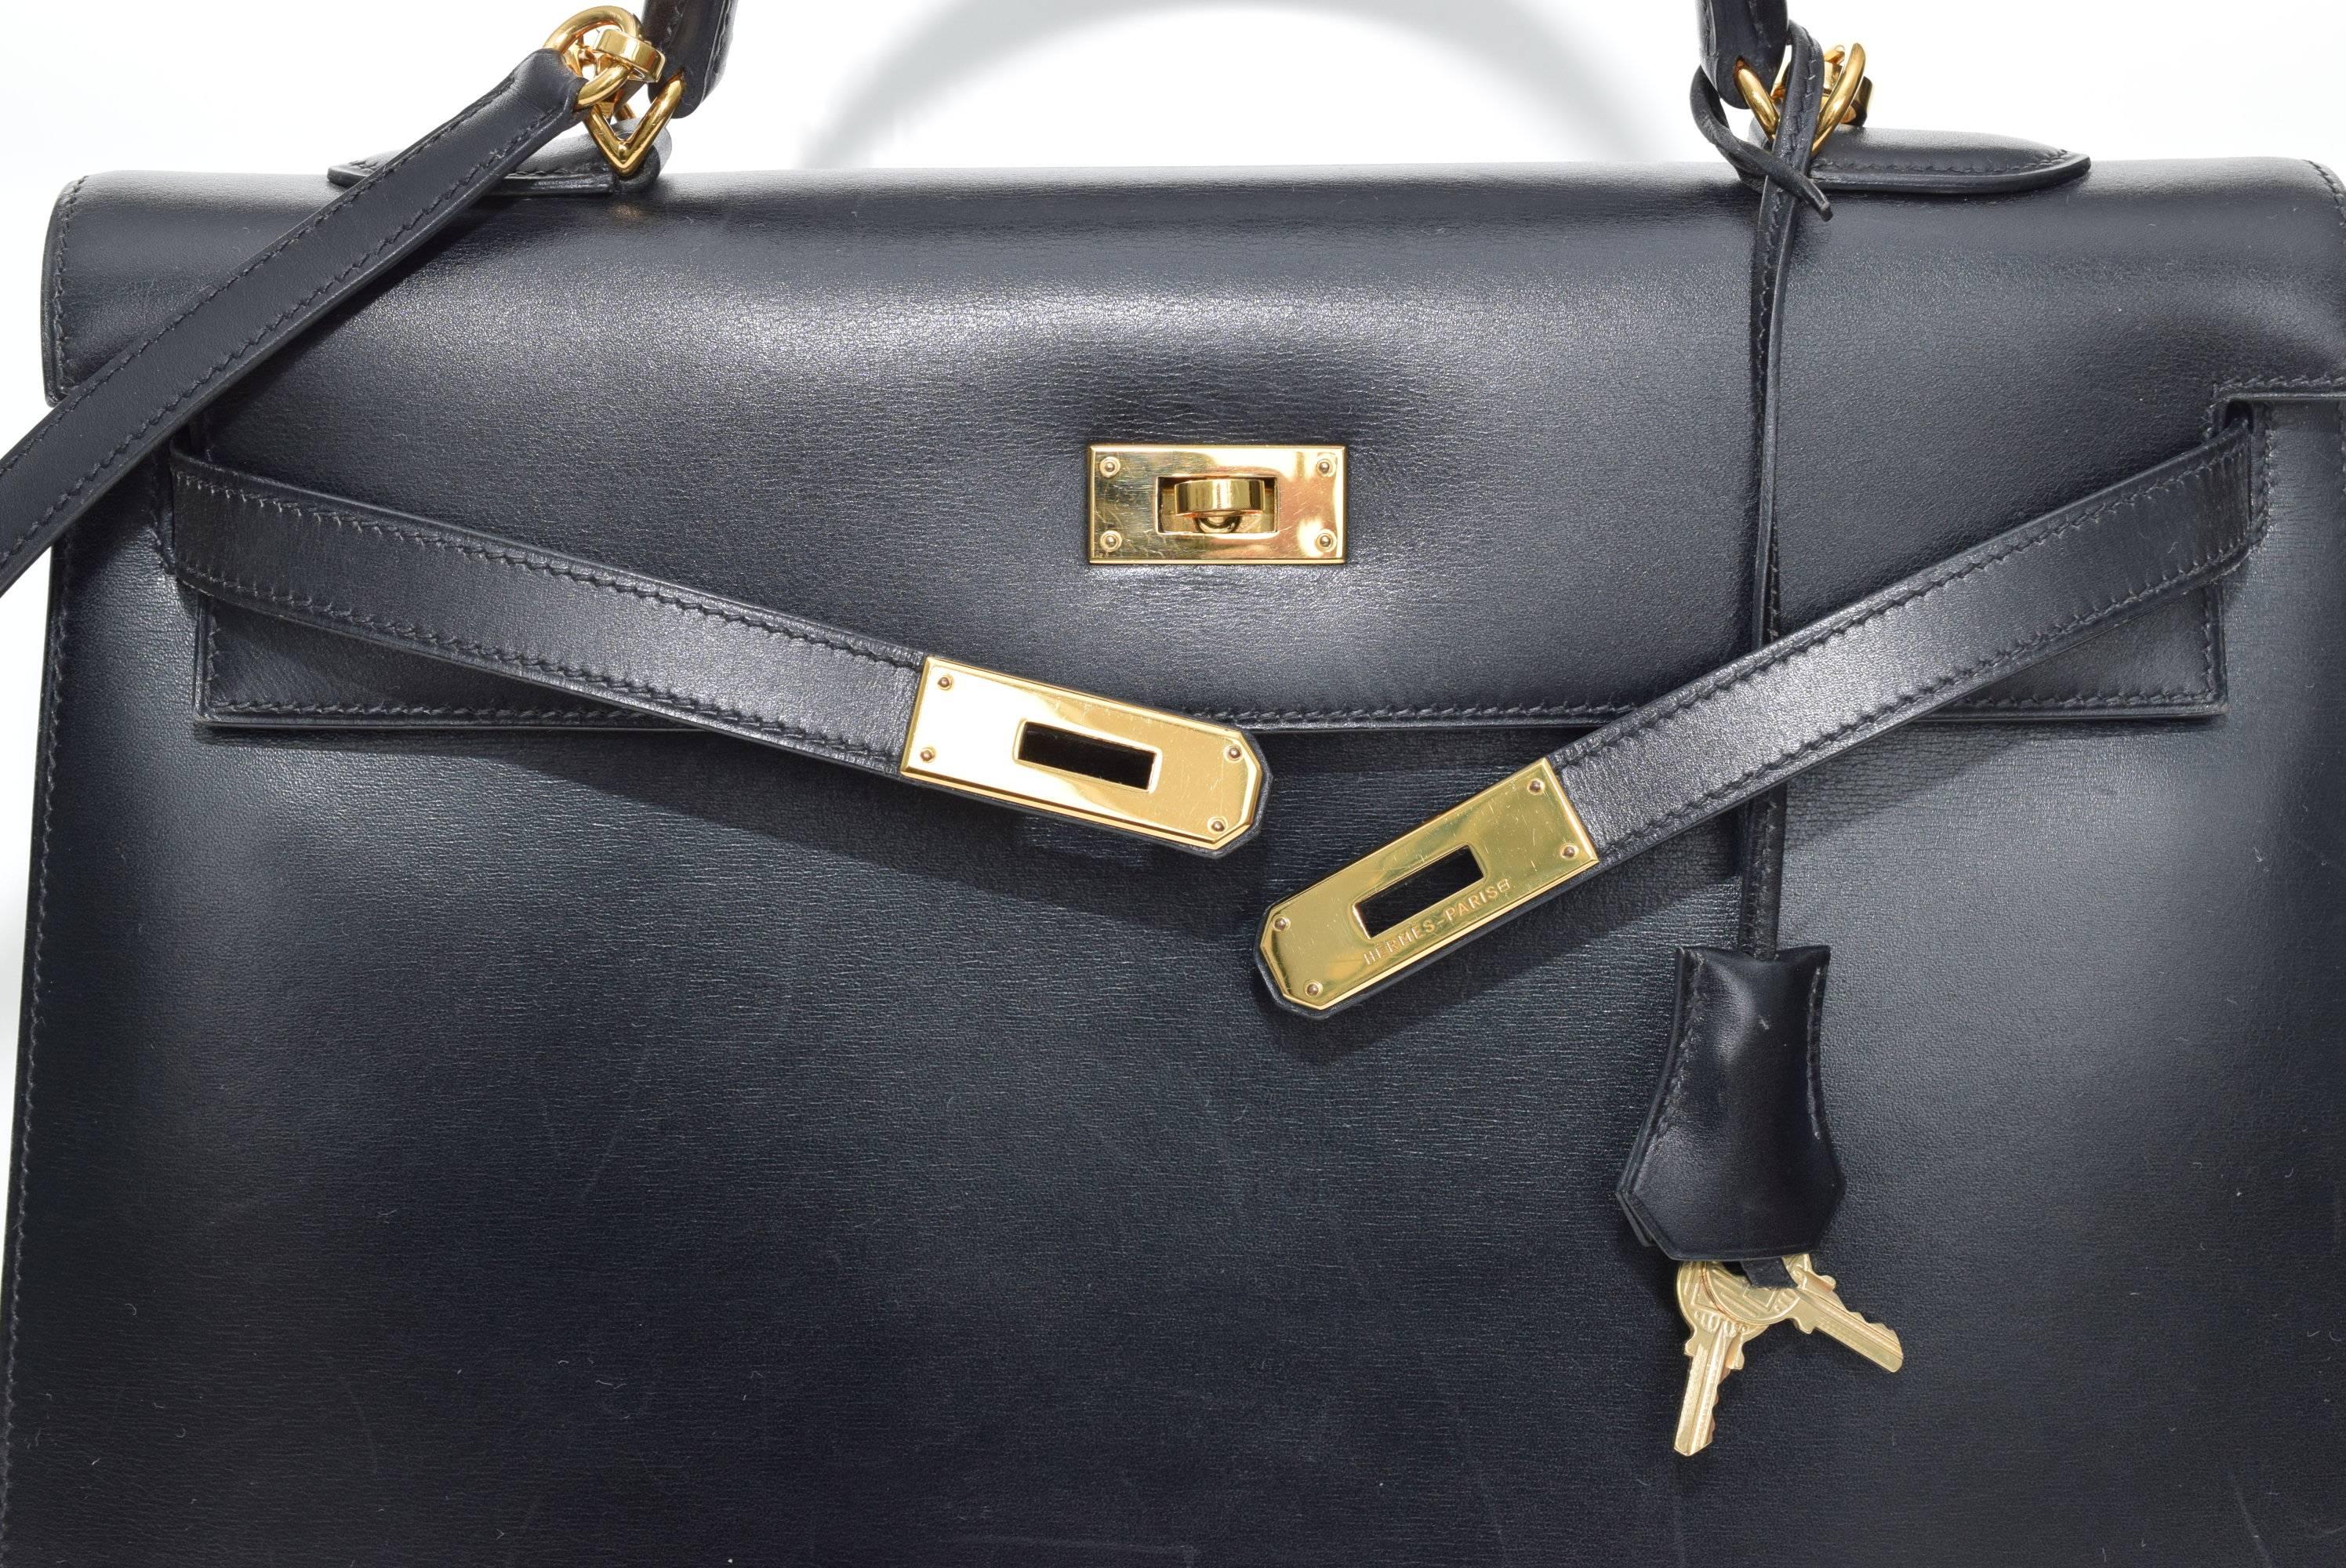 Herrmes Black Kelly 35cm in box leather with gold hardware. 5